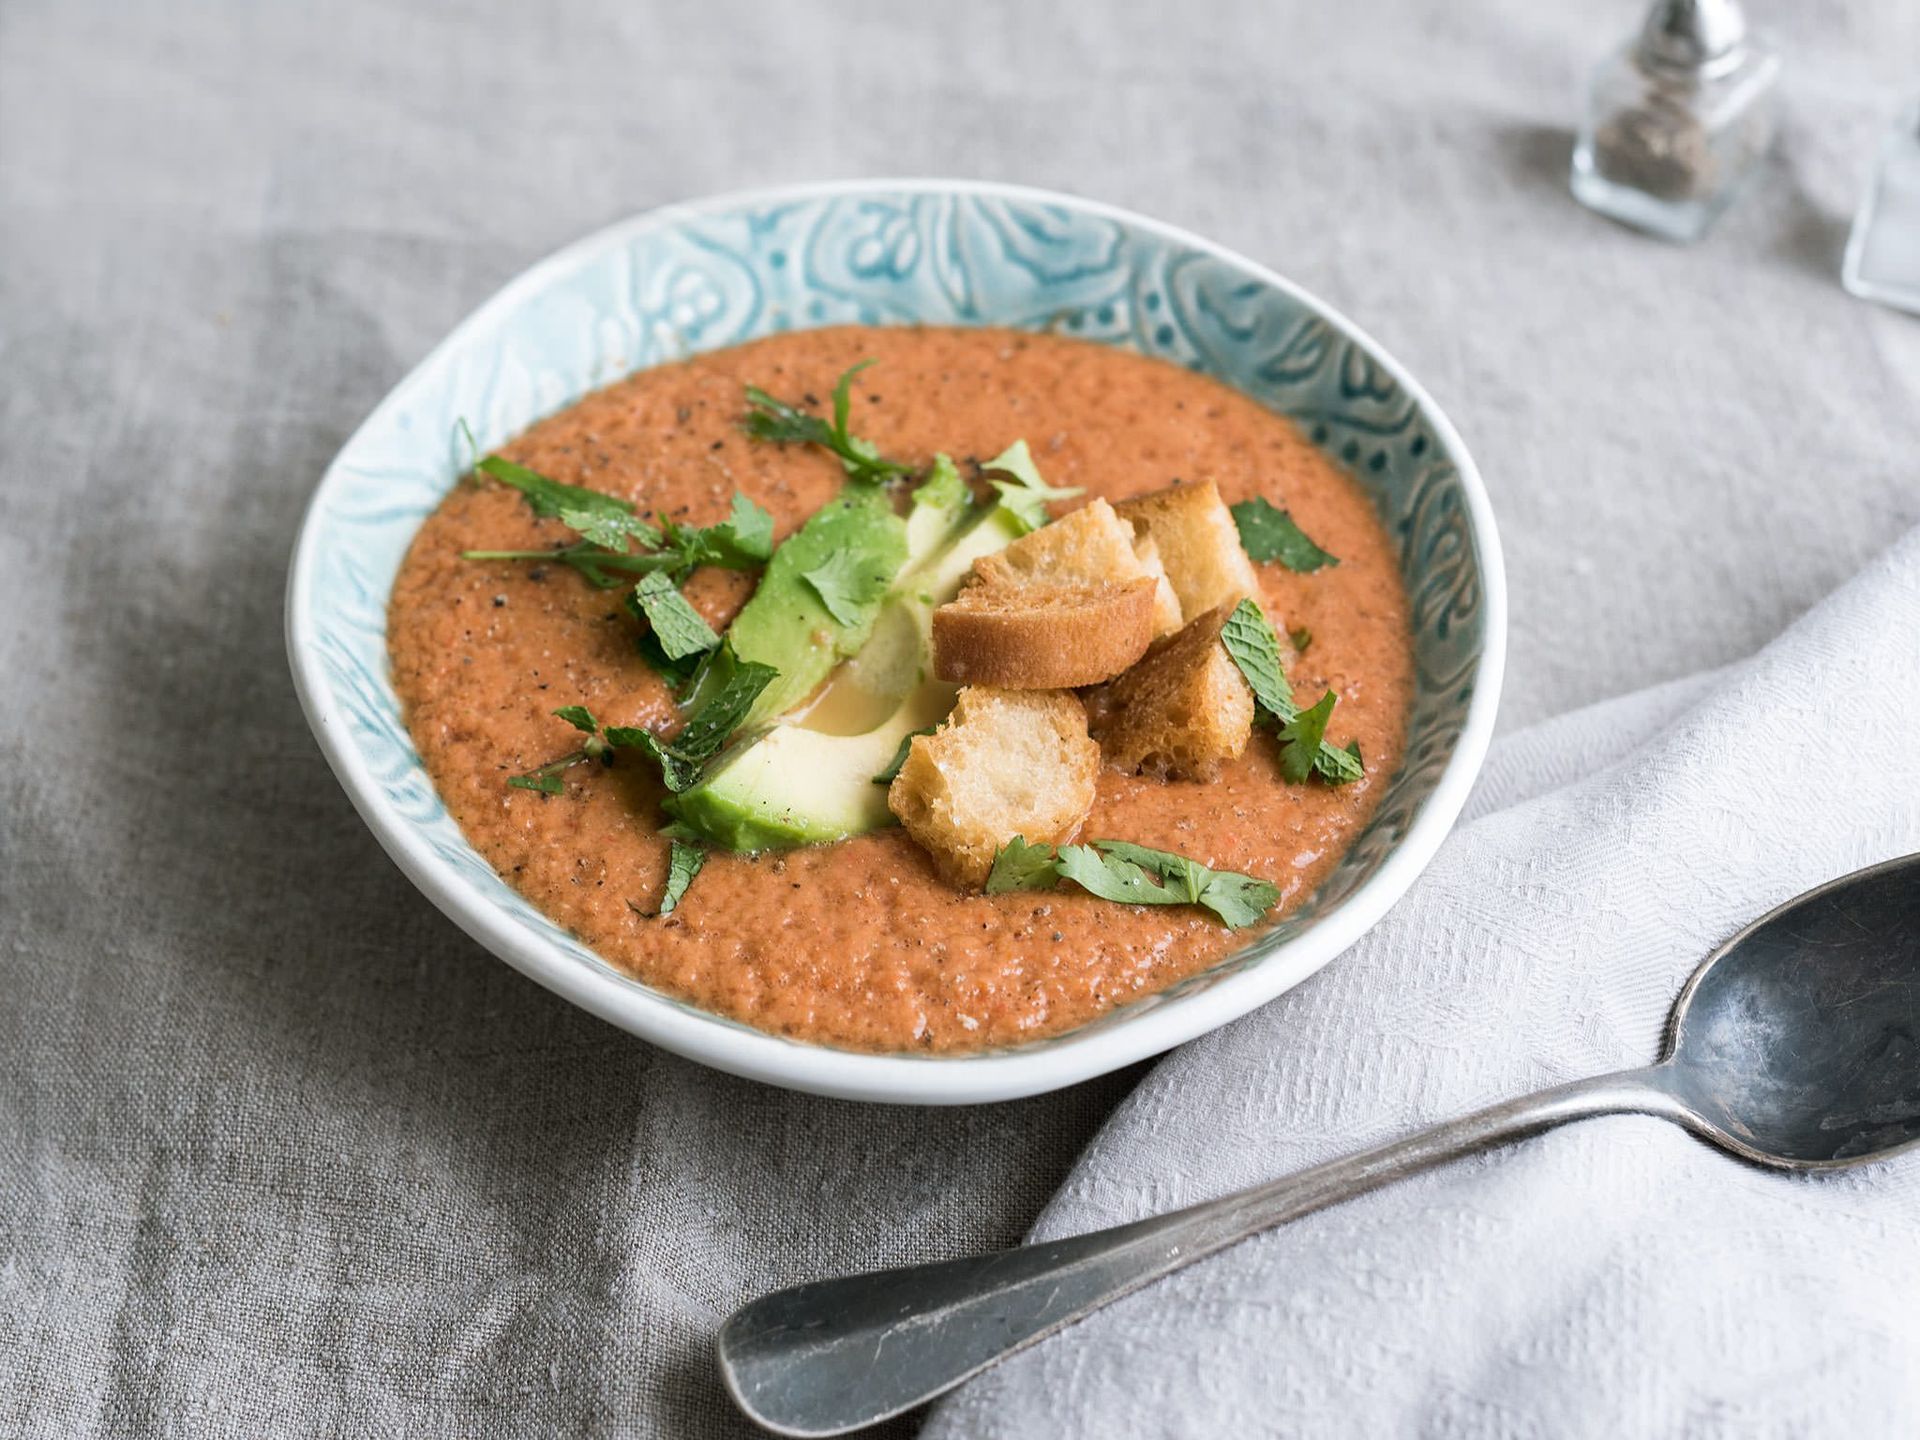 Tomato-melon gazpacho with coconut croutons